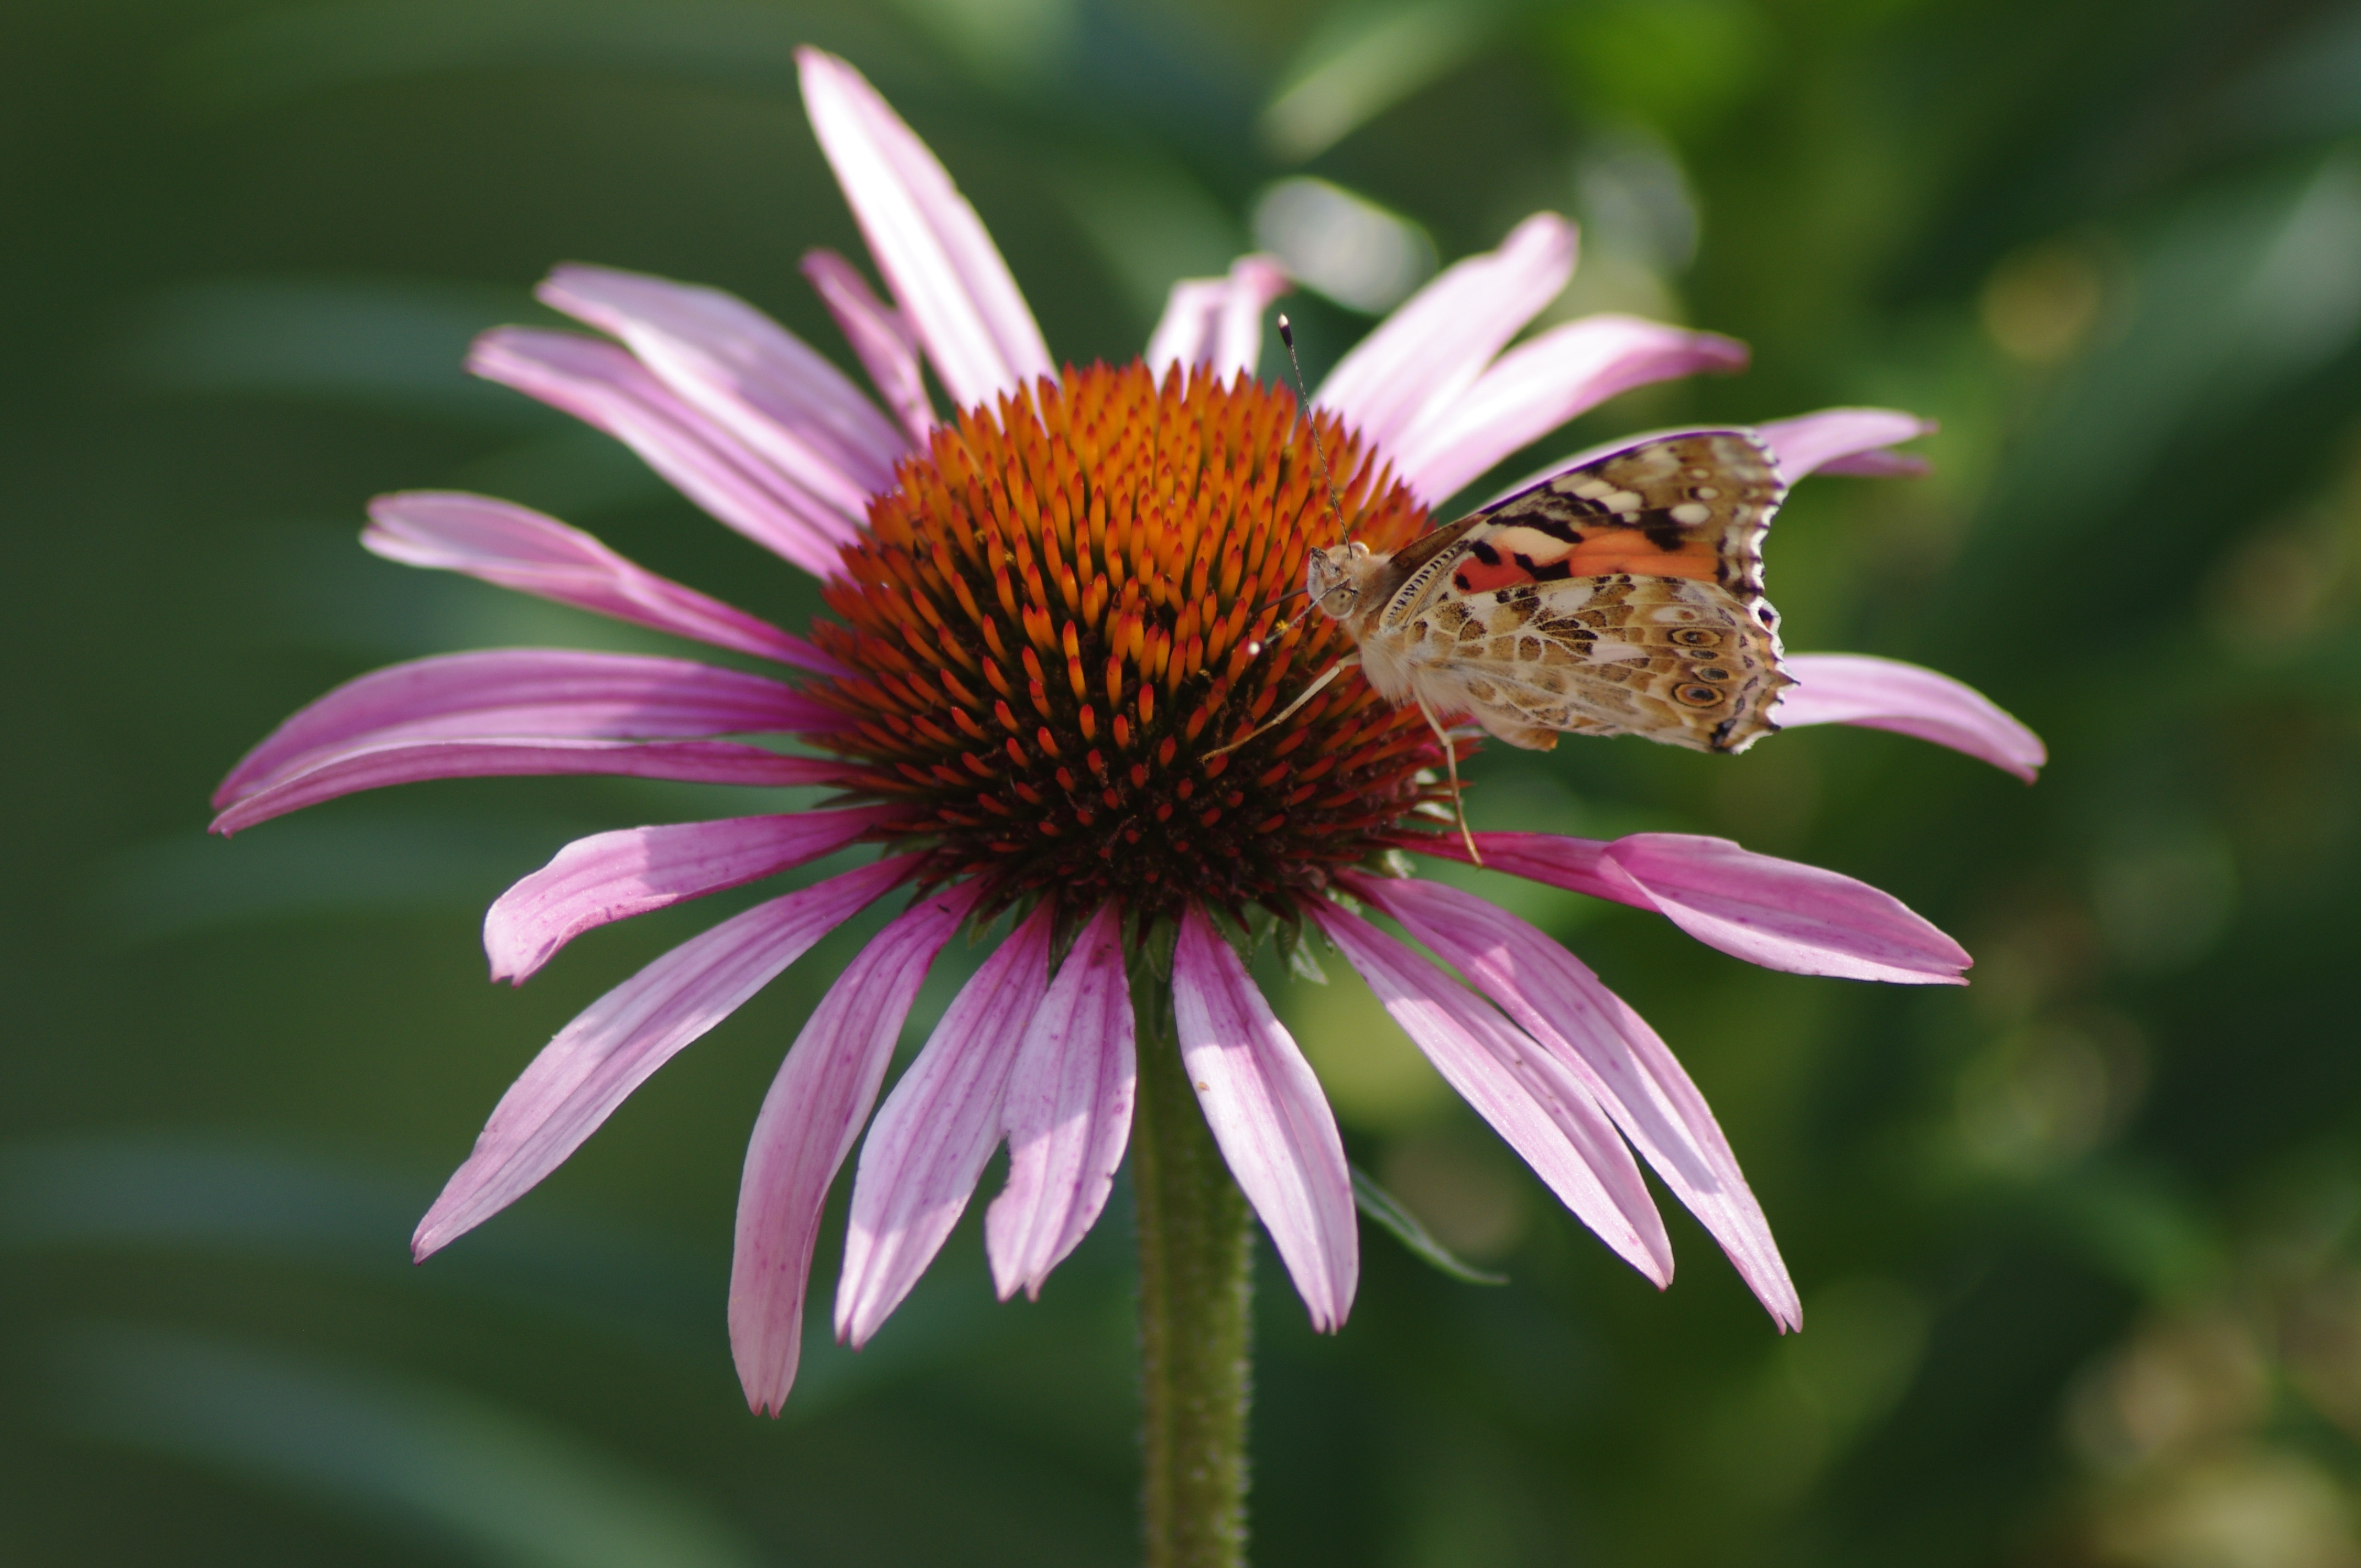 butterfly on pink flower in closeup photograhy